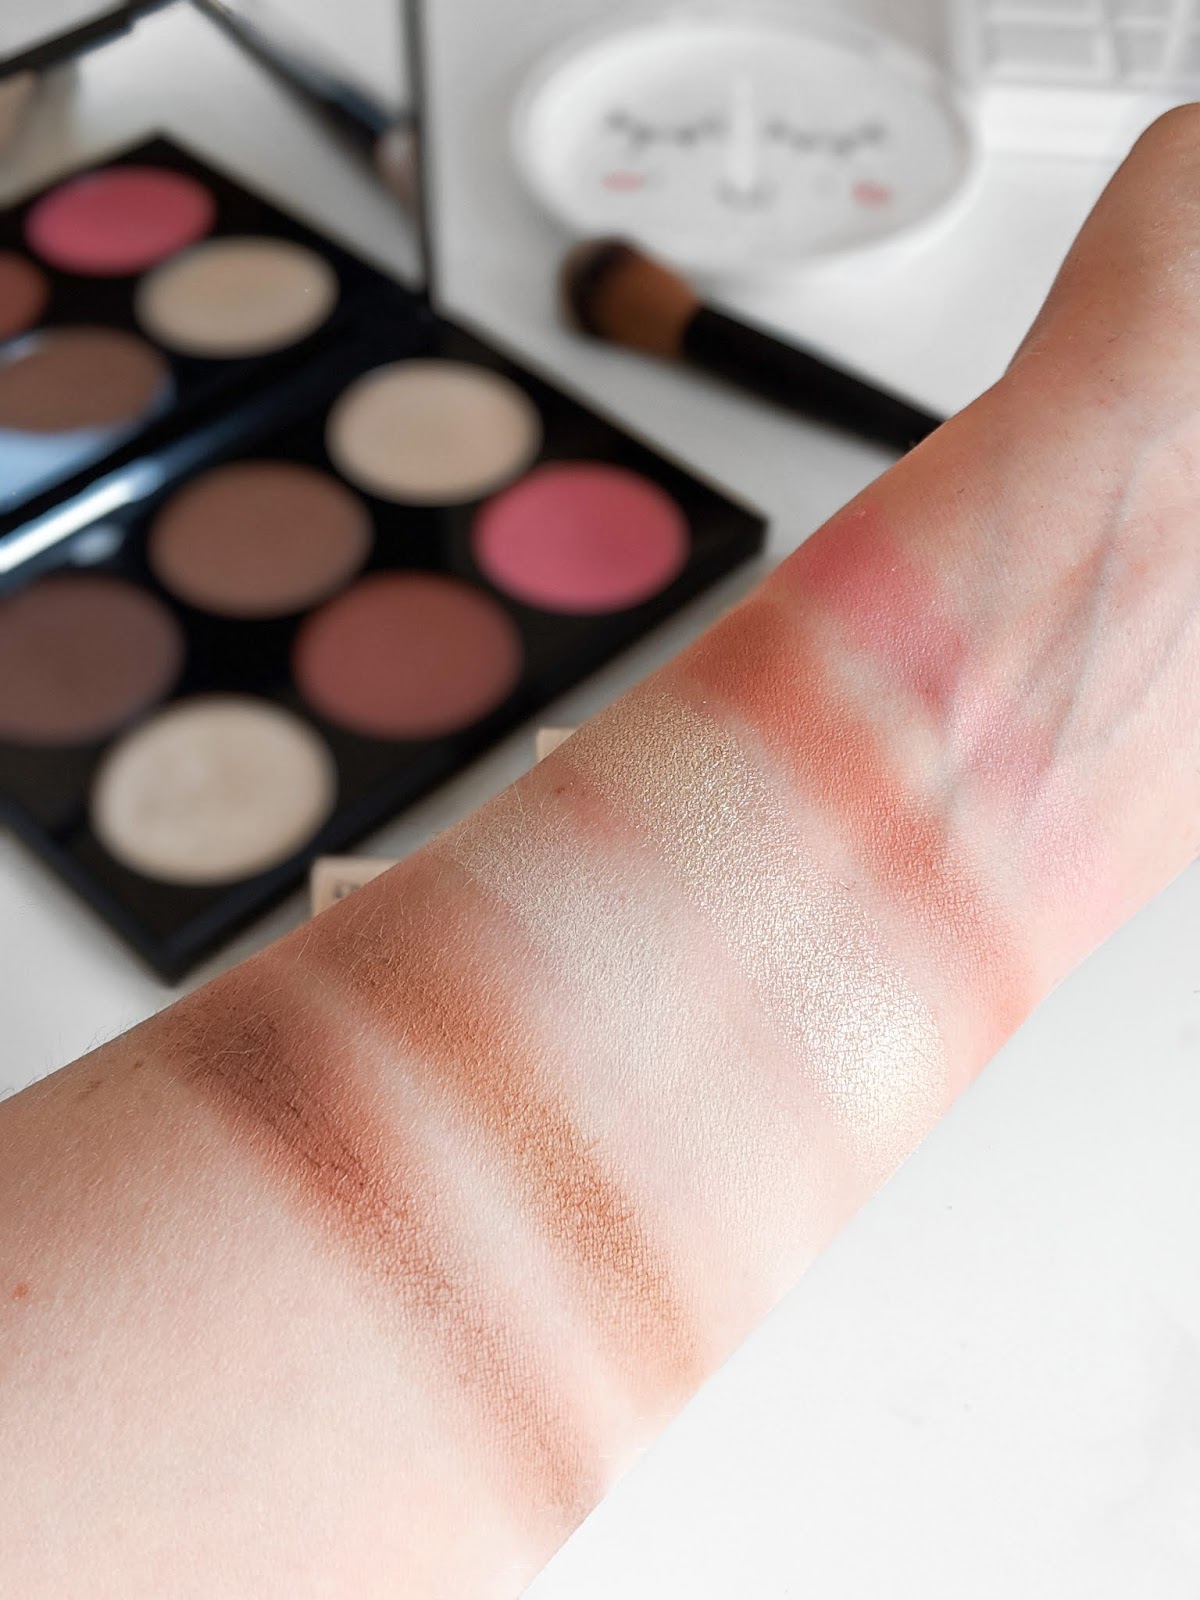 Image of swatches of the Diego Dalla Palma Full Face Palette on arm